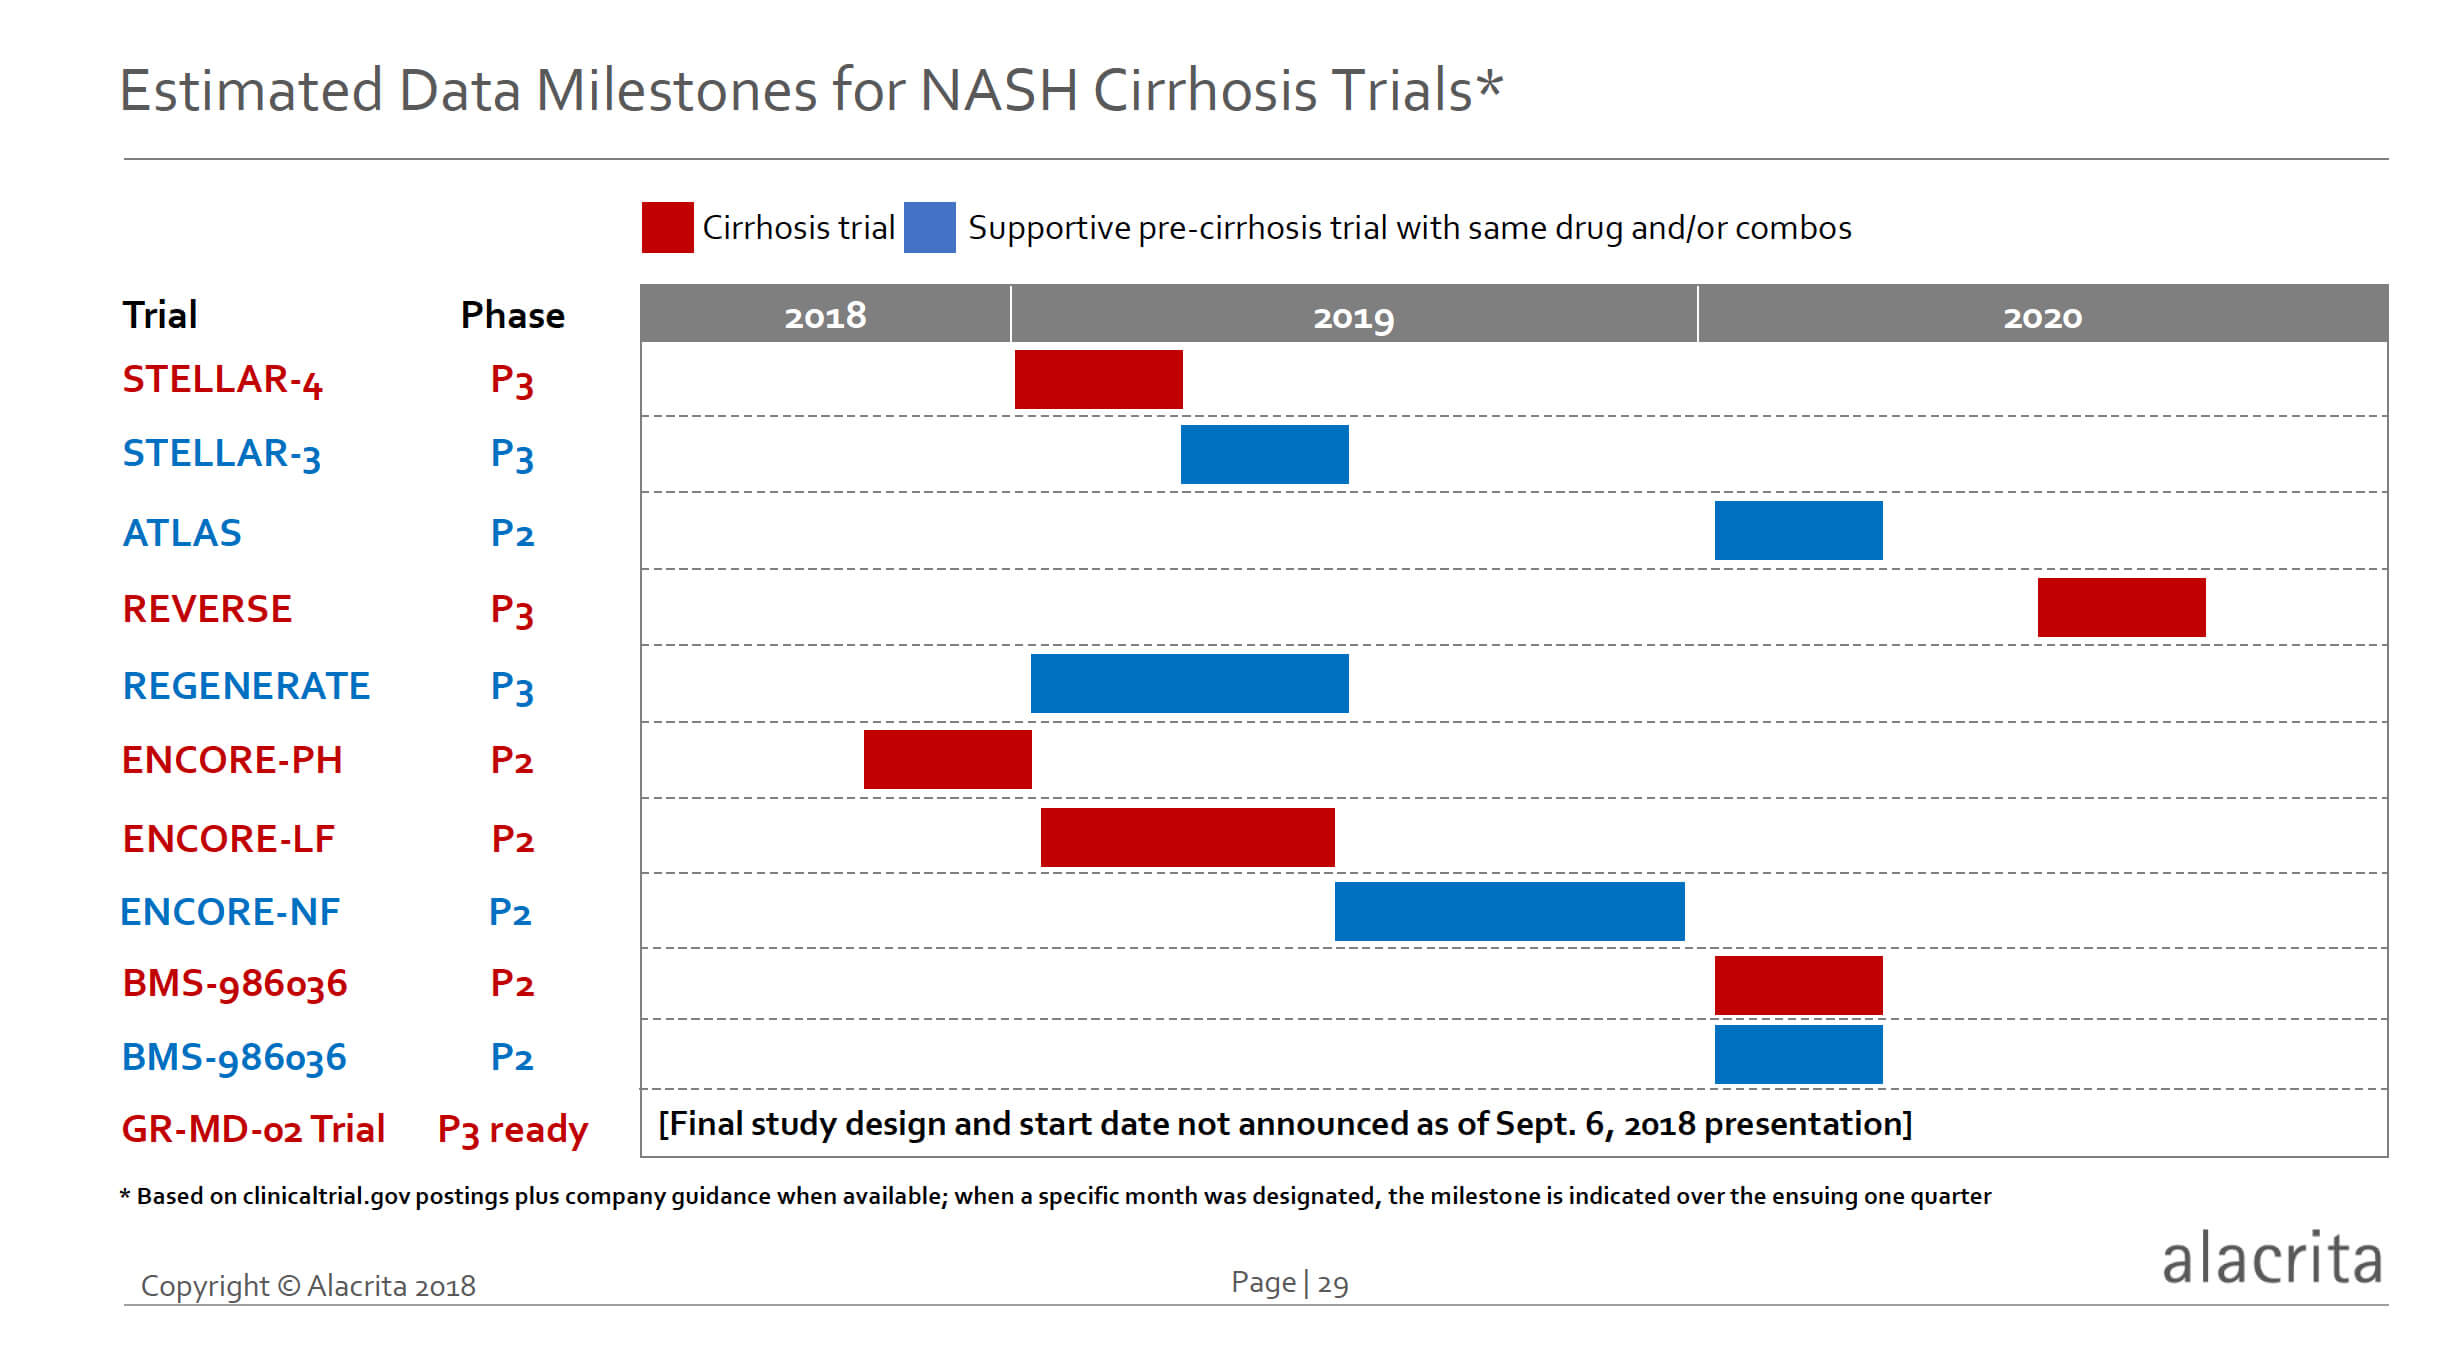 NASH Cirrhosis Space Poised to Heat Up